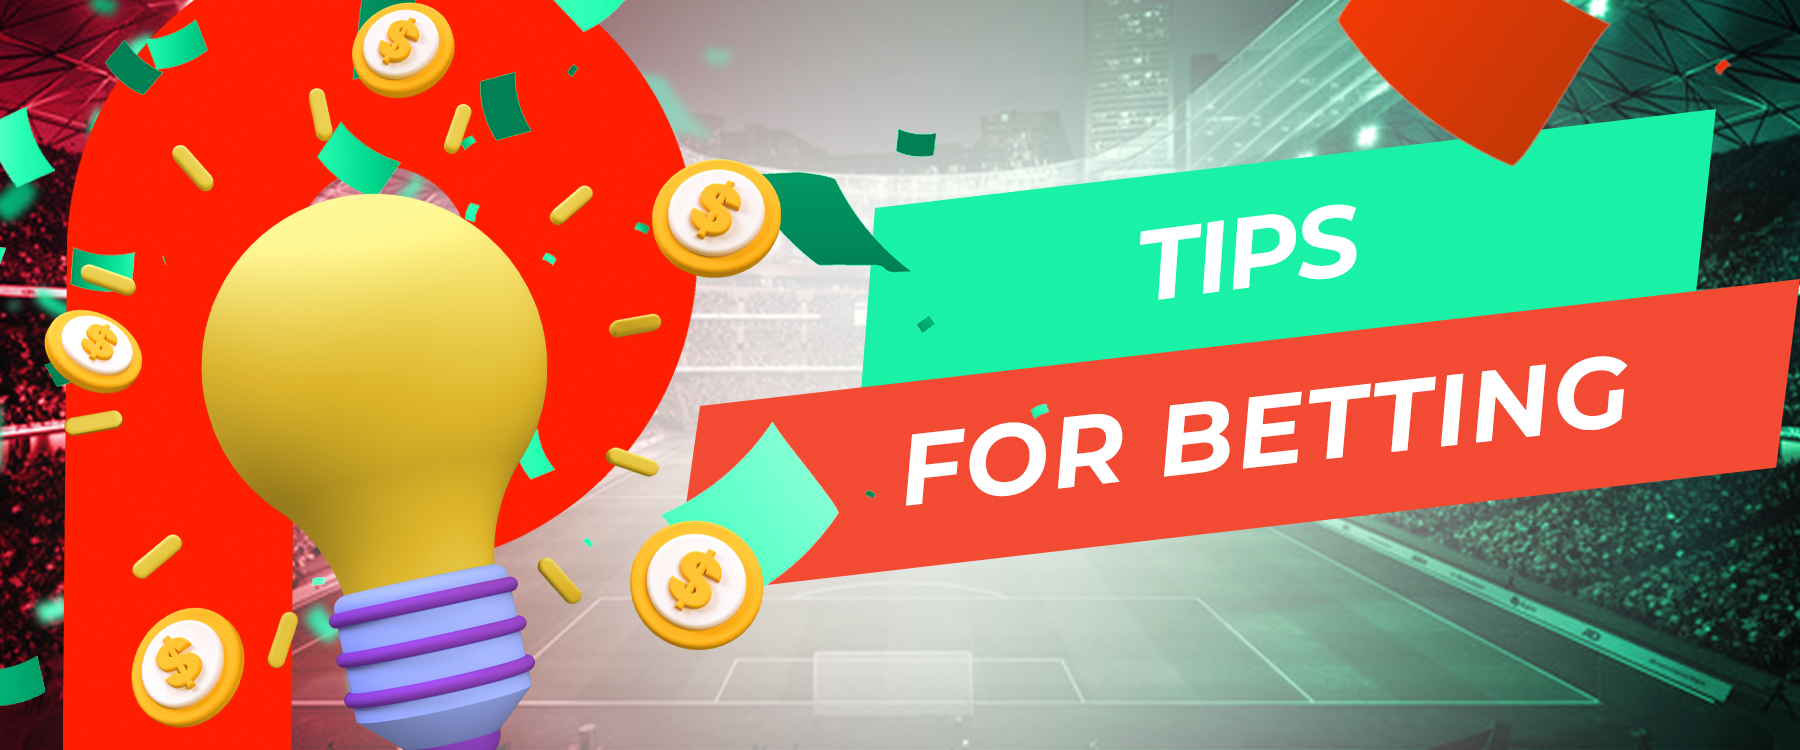 What are the best tips to make a good bet on the IPL